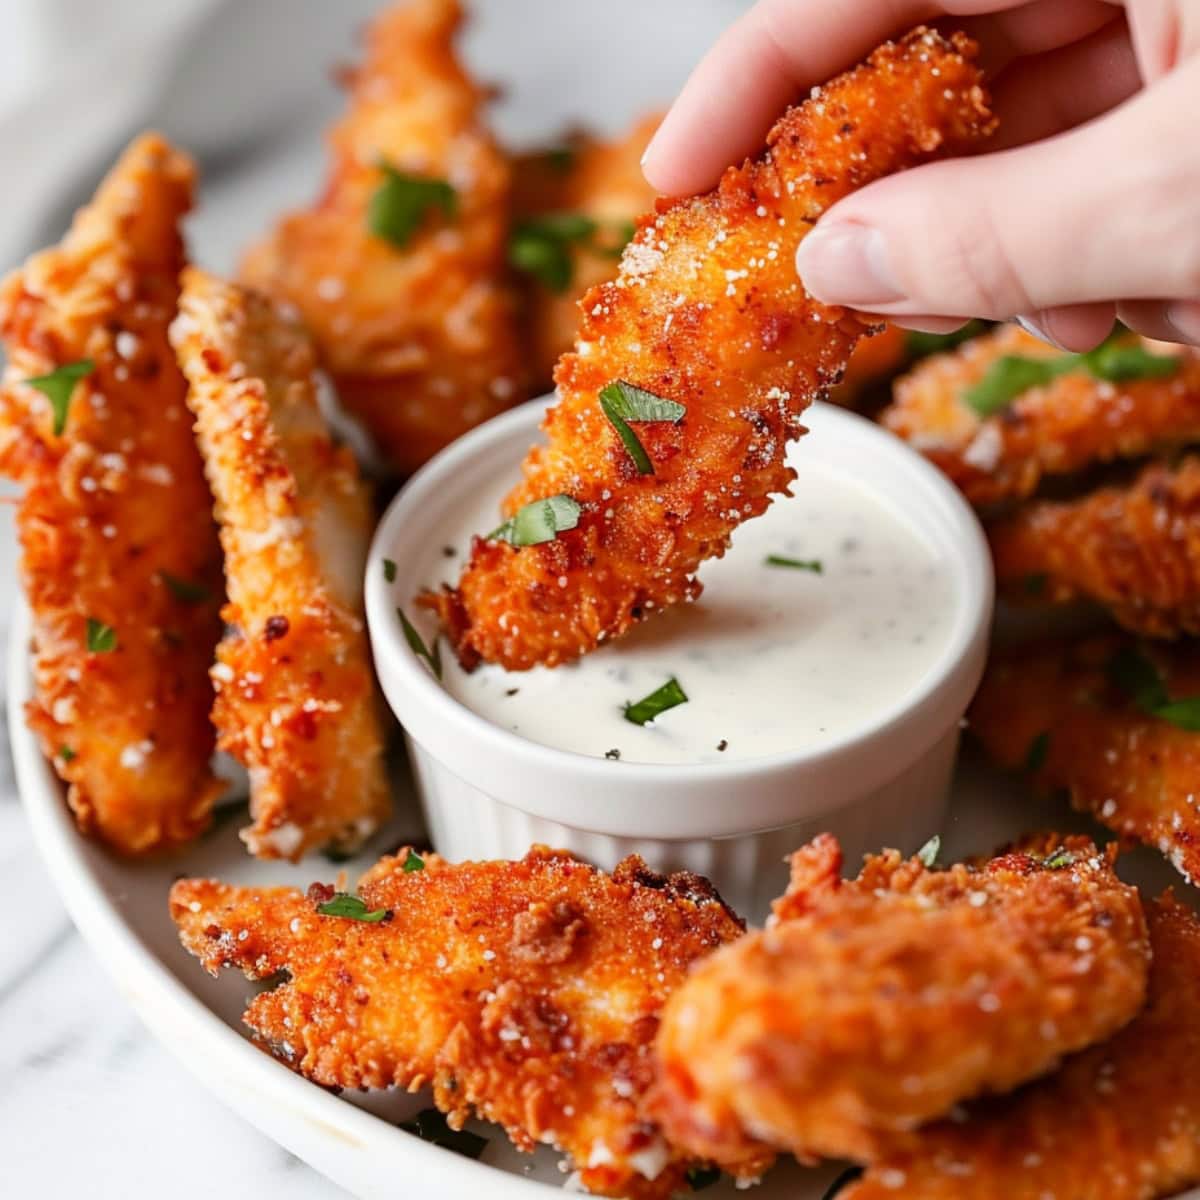 Crushed Dorito coated chicken tenders dipped in ranch dressing.